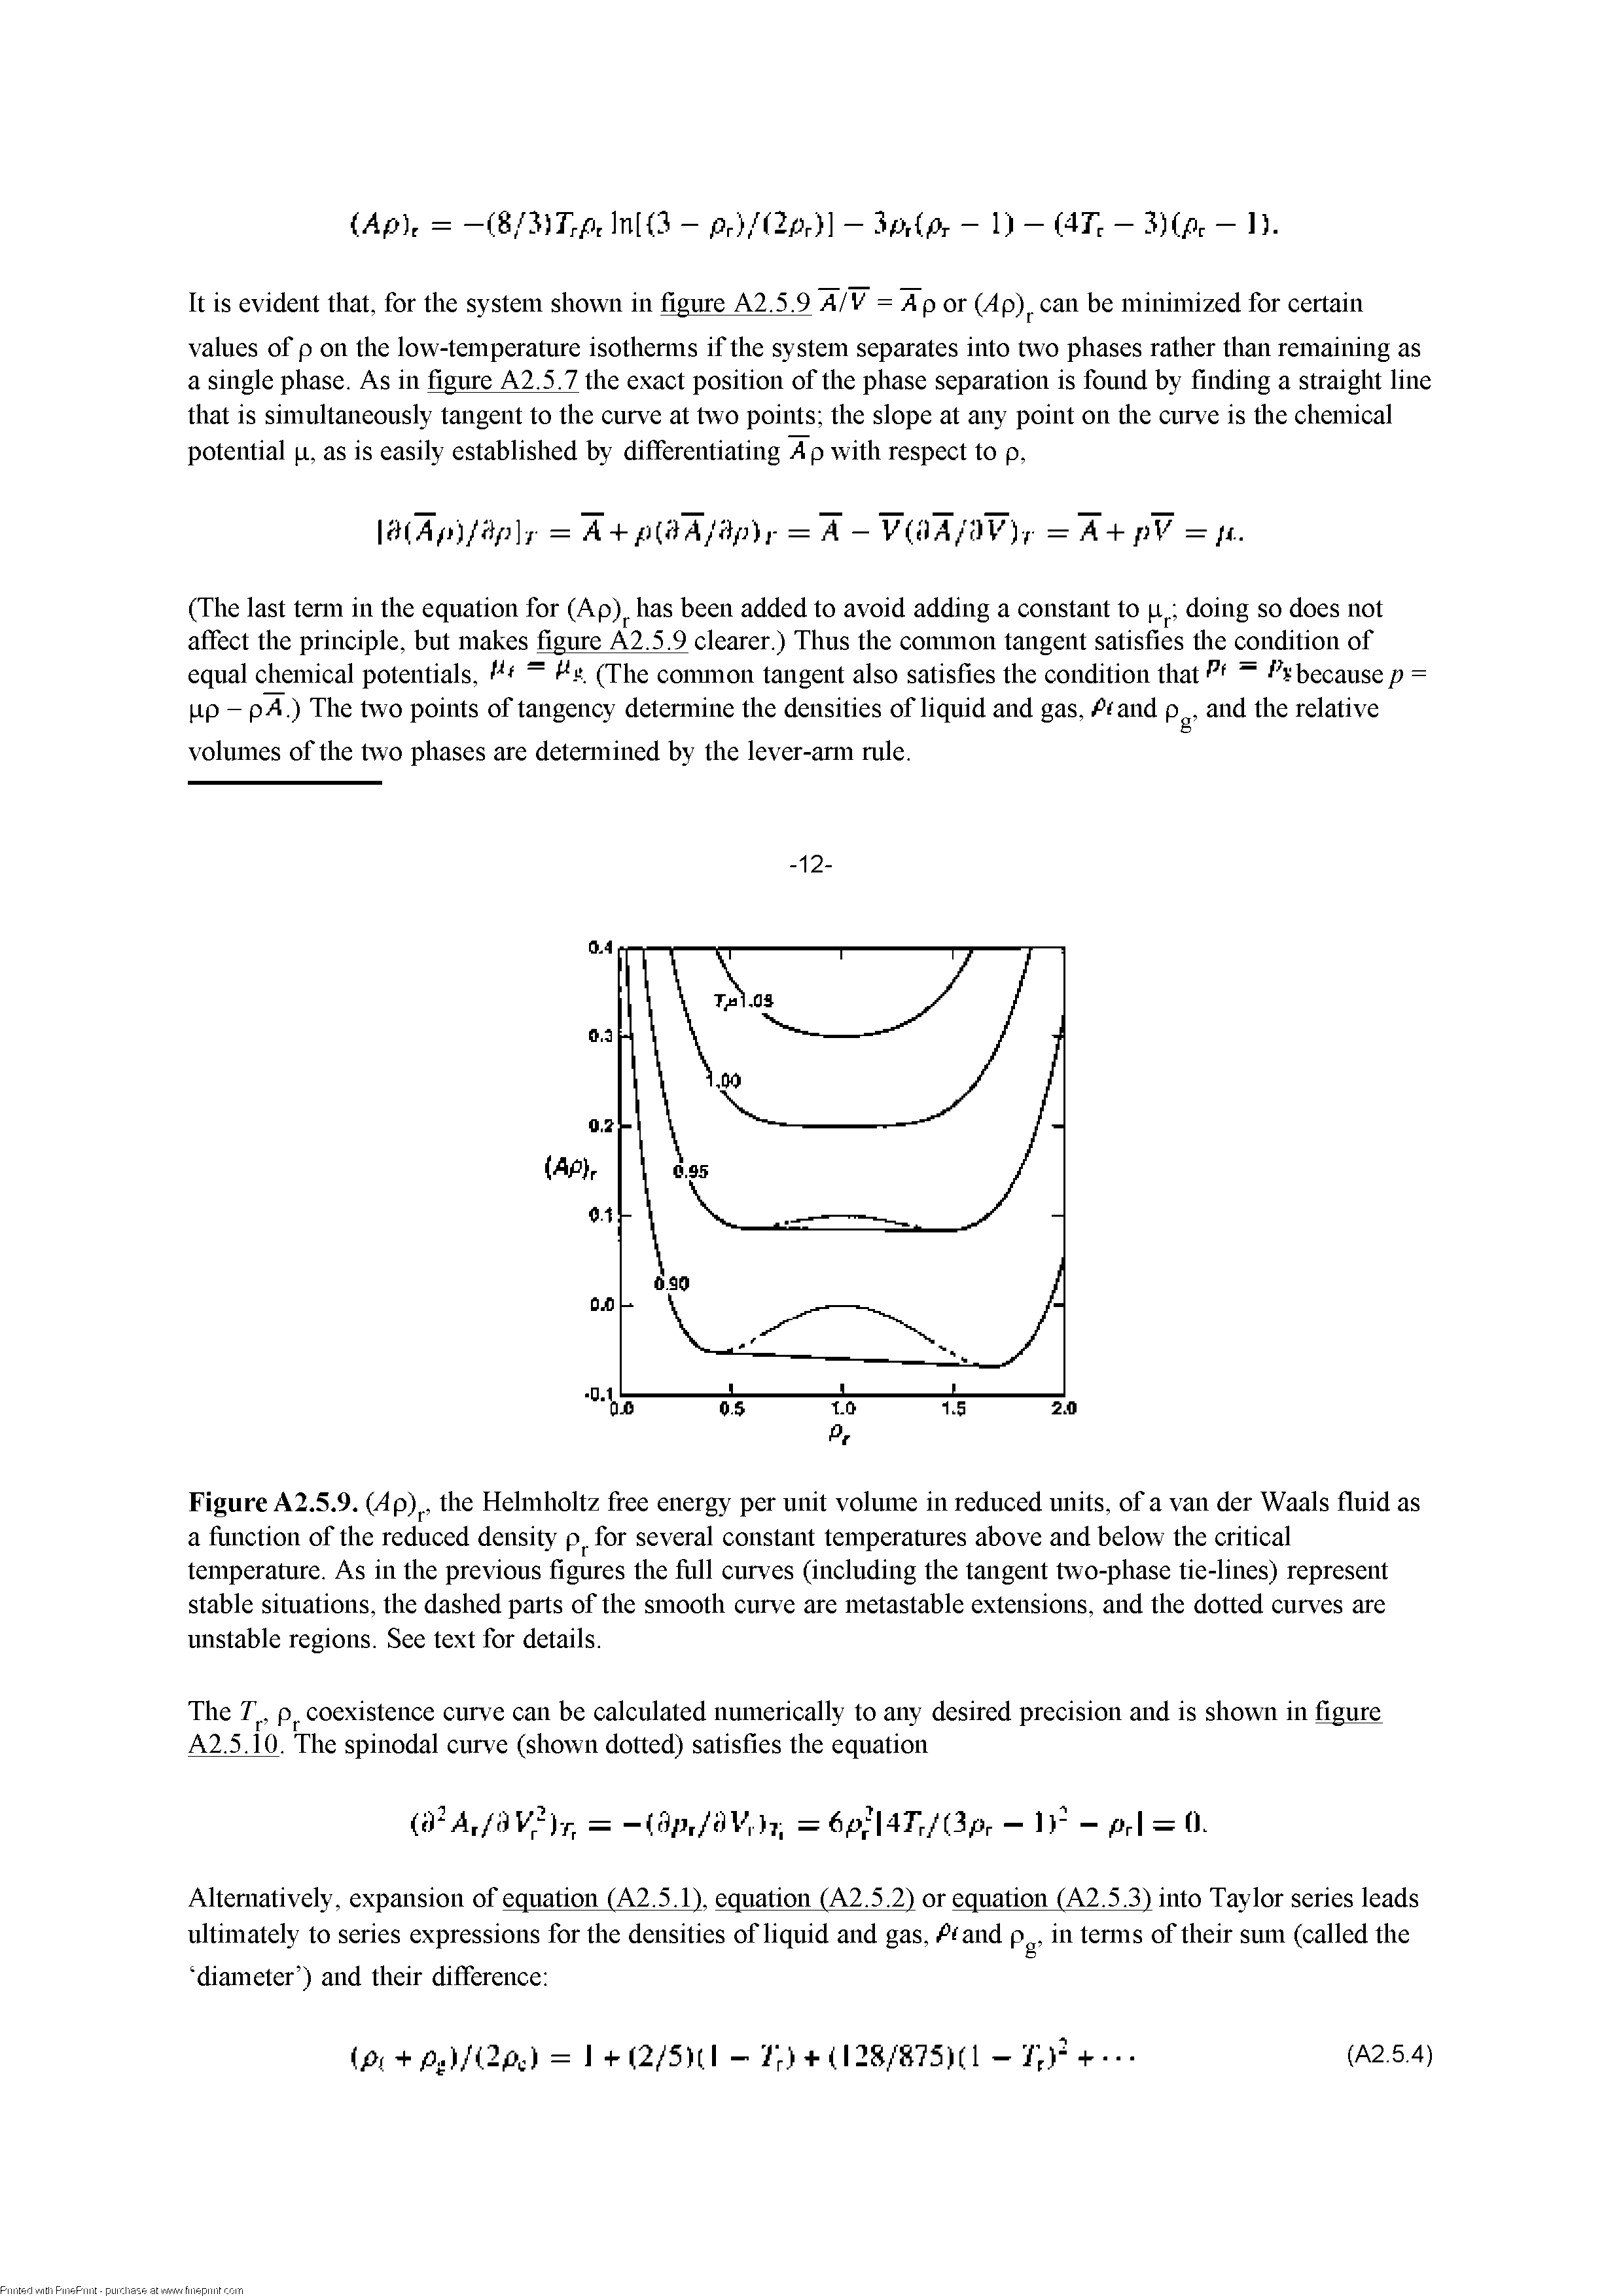 Figure A2.5.9. (Ap), the Helmholtz free energy per unit volume in reduced units, of a van der Waals fluid as a fiinction of the reduced density p for several constant temperaPires above and below the critical temperaPire. As in the previous figures the llill curves (including the tangent two-phase tie-lines) represent stable siPiations, the dashed parts of the smooth curve are metastable extensions, and the dotted curves are unstable regions. See text for details.